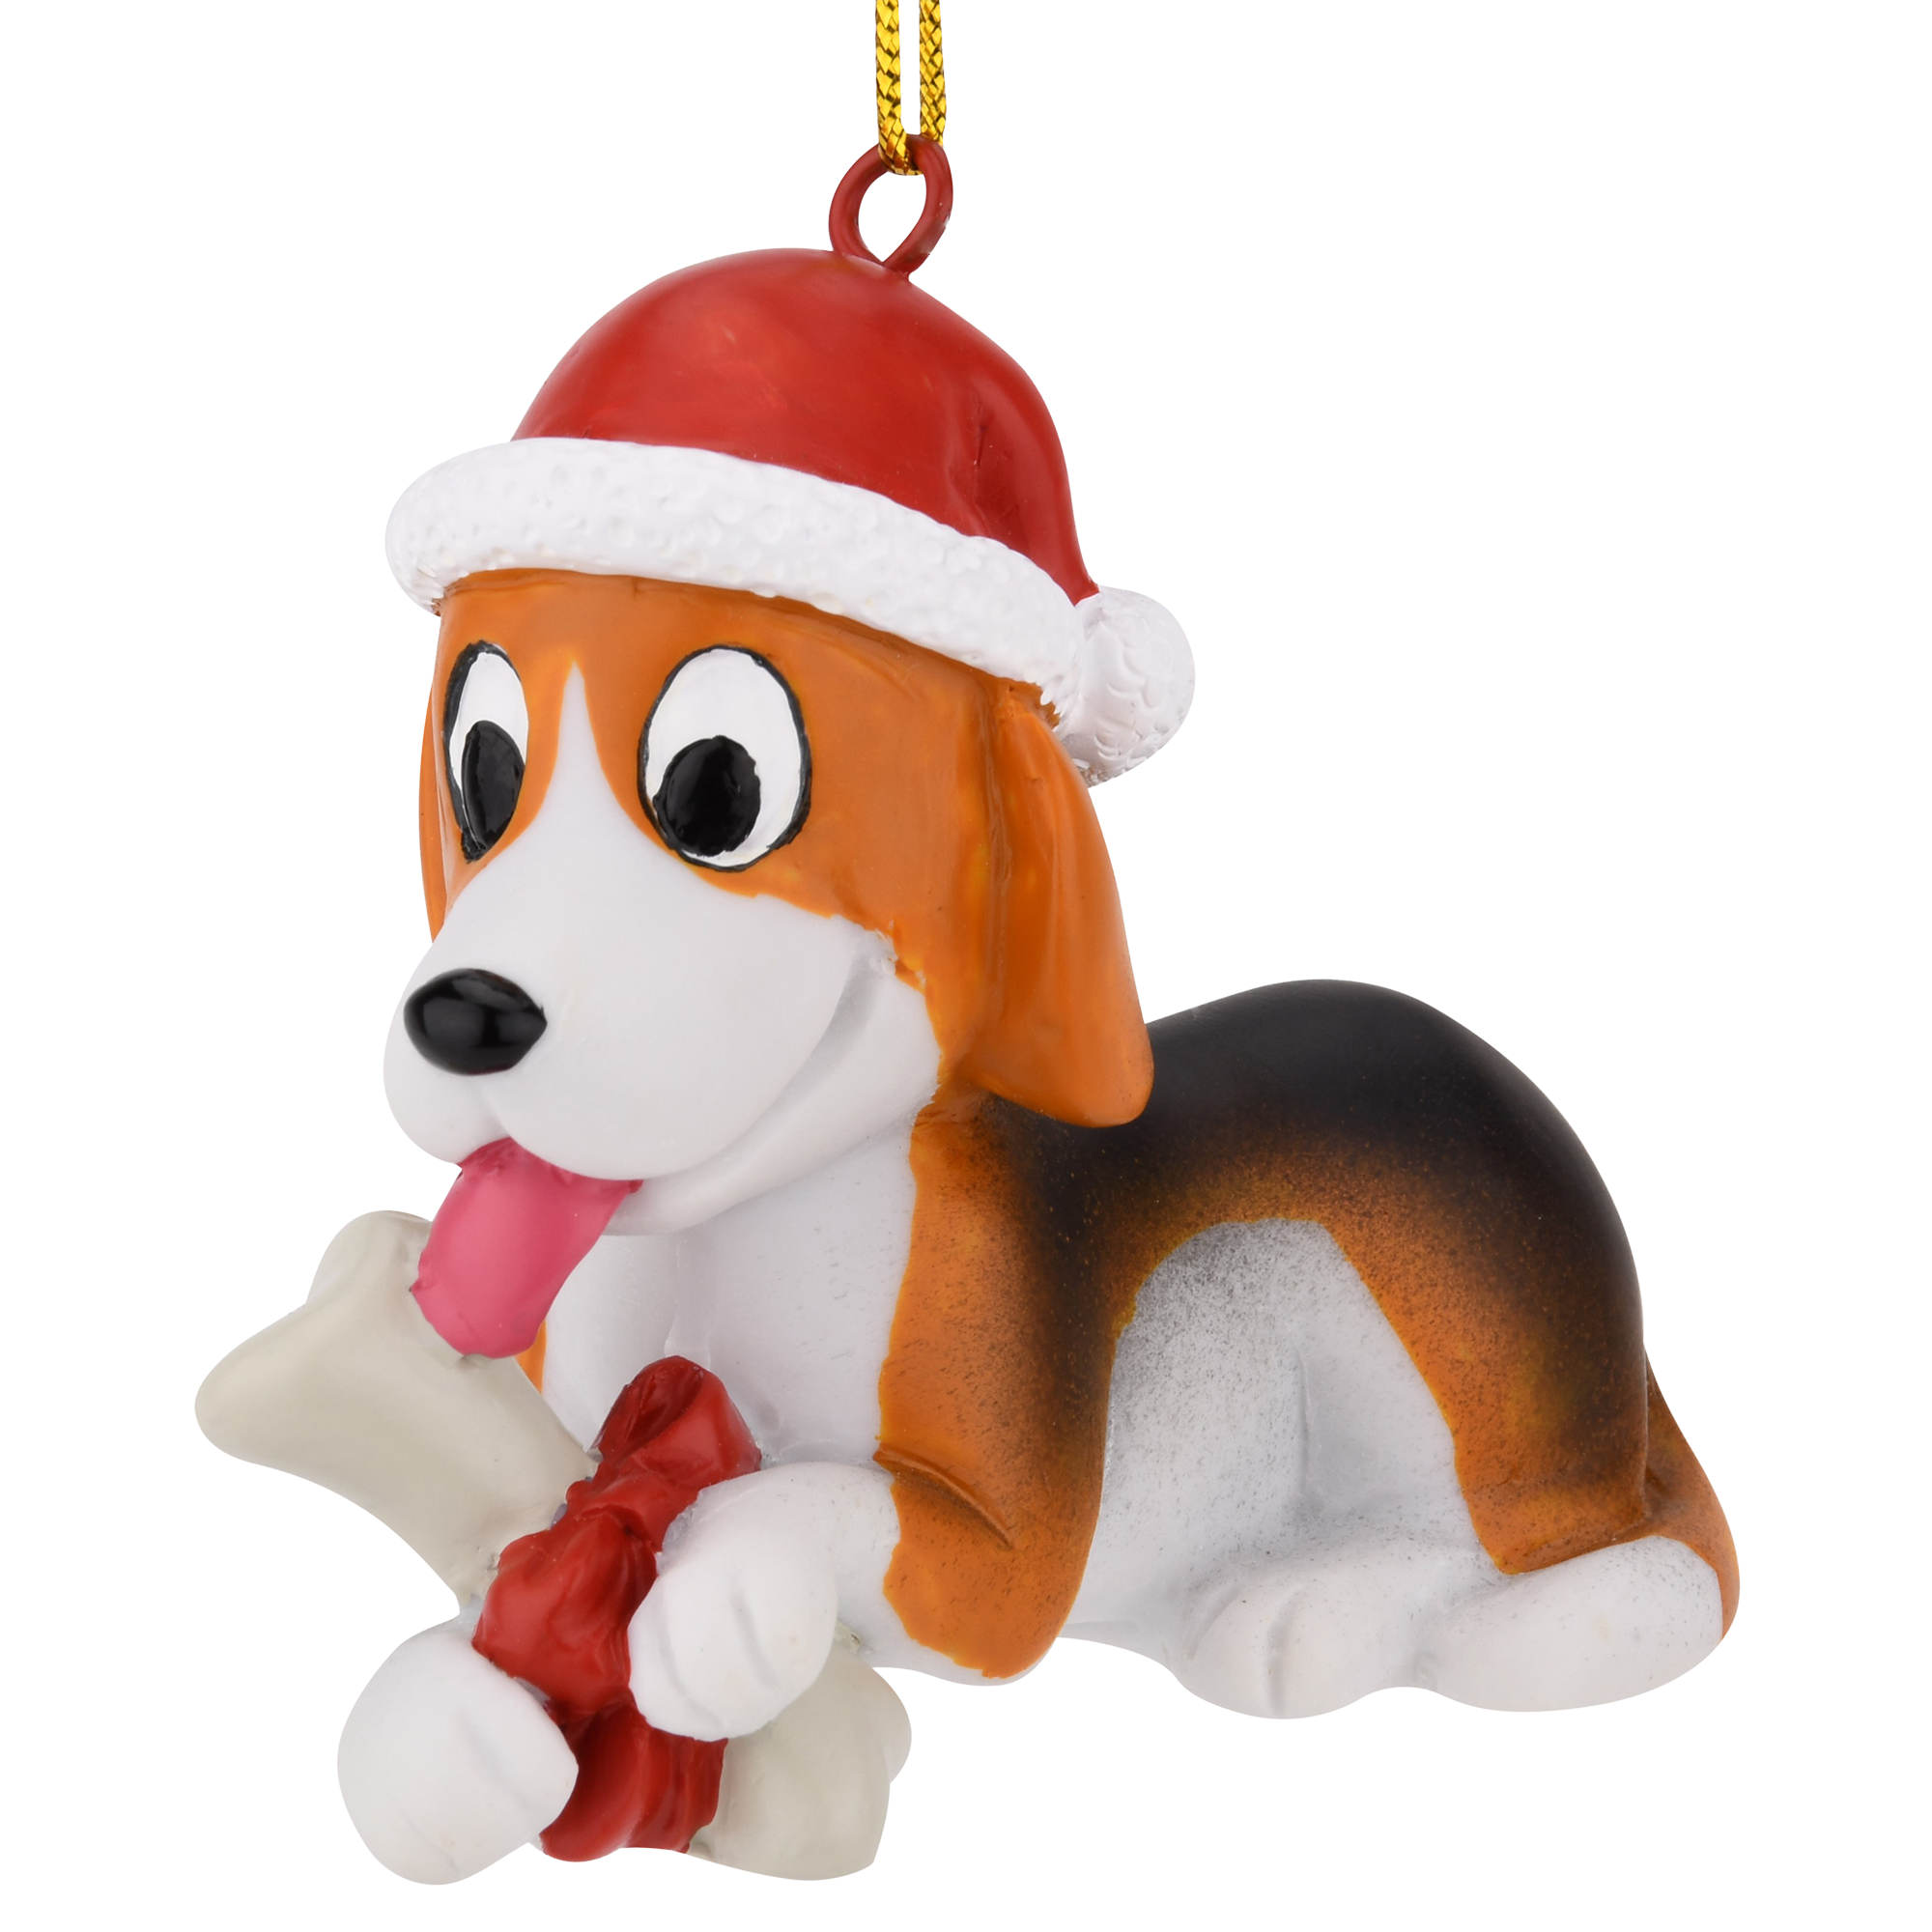 puppy christmas ornament